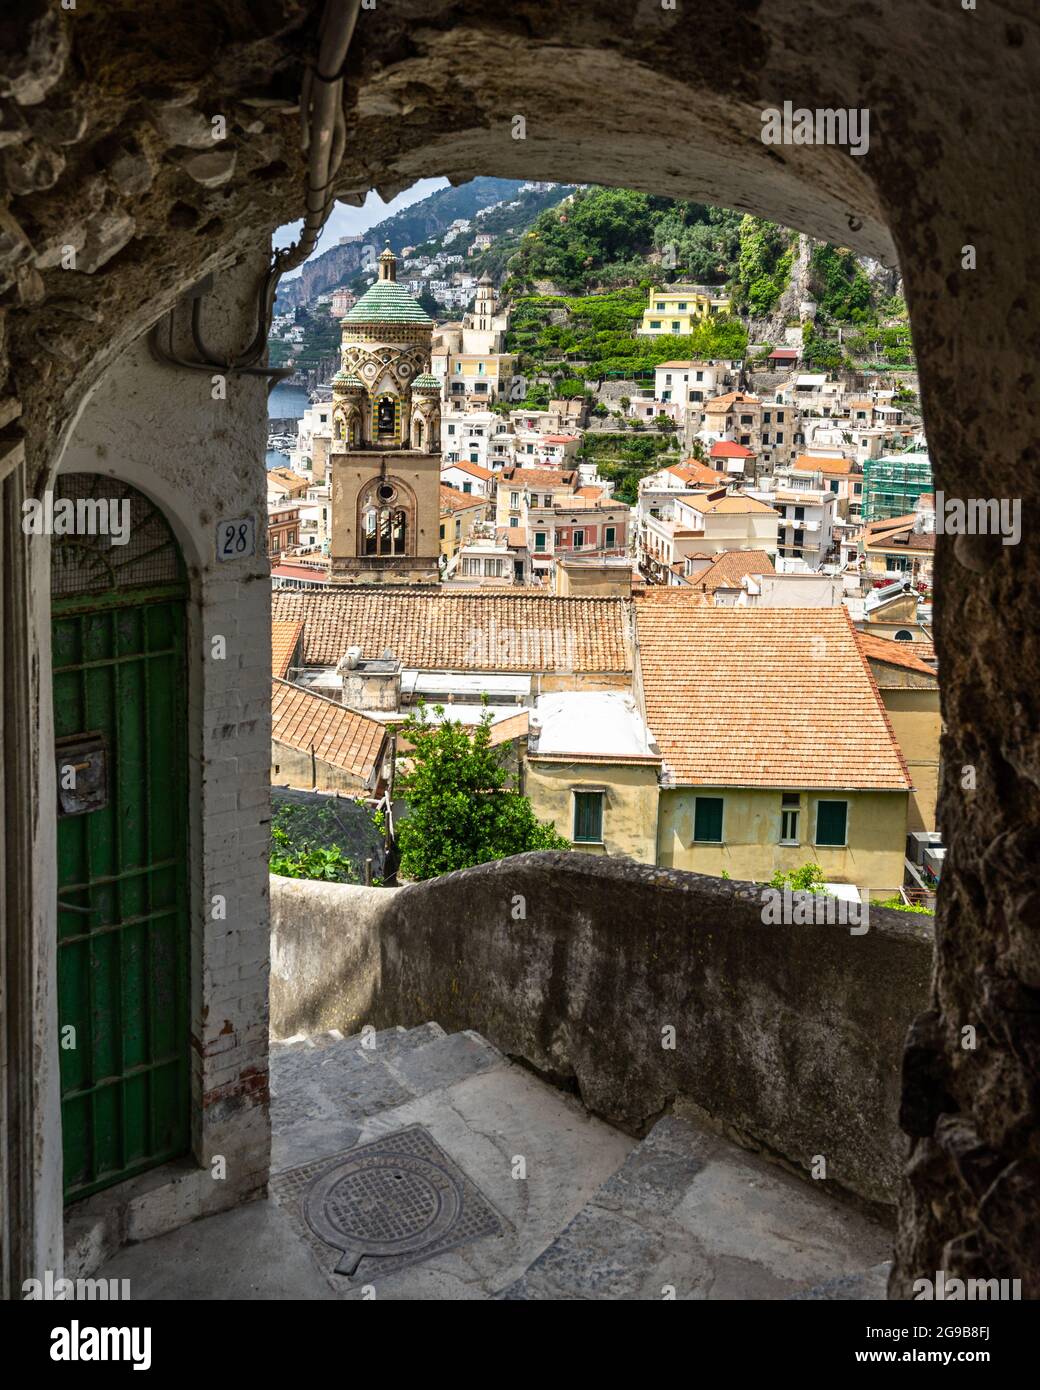 Amalfi with the cathedral's bell tower seen from a steep stairway climbing up the hill, Italy Stock Photo